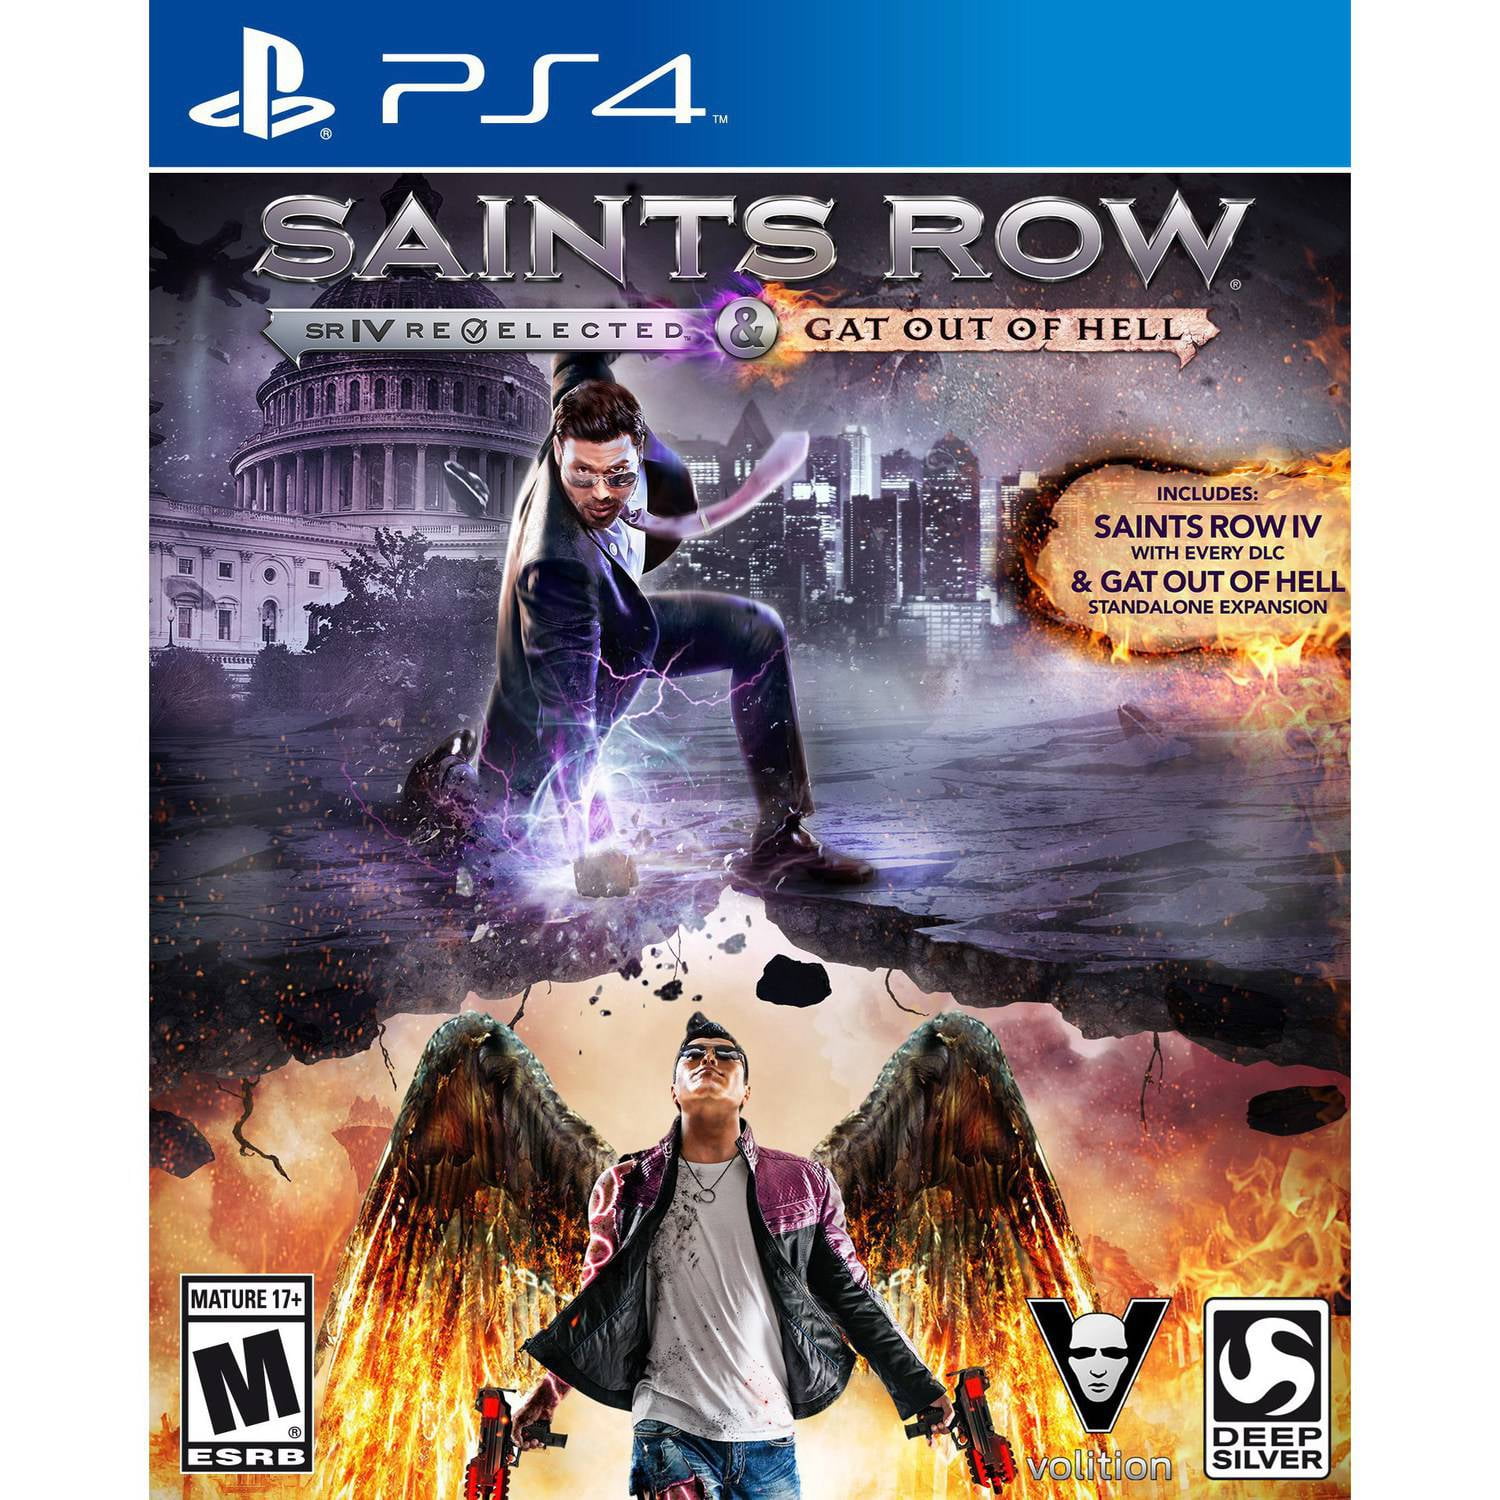 Saints Row Iv Re Elected Gat Out Of Hell Ps4 Walmart Com